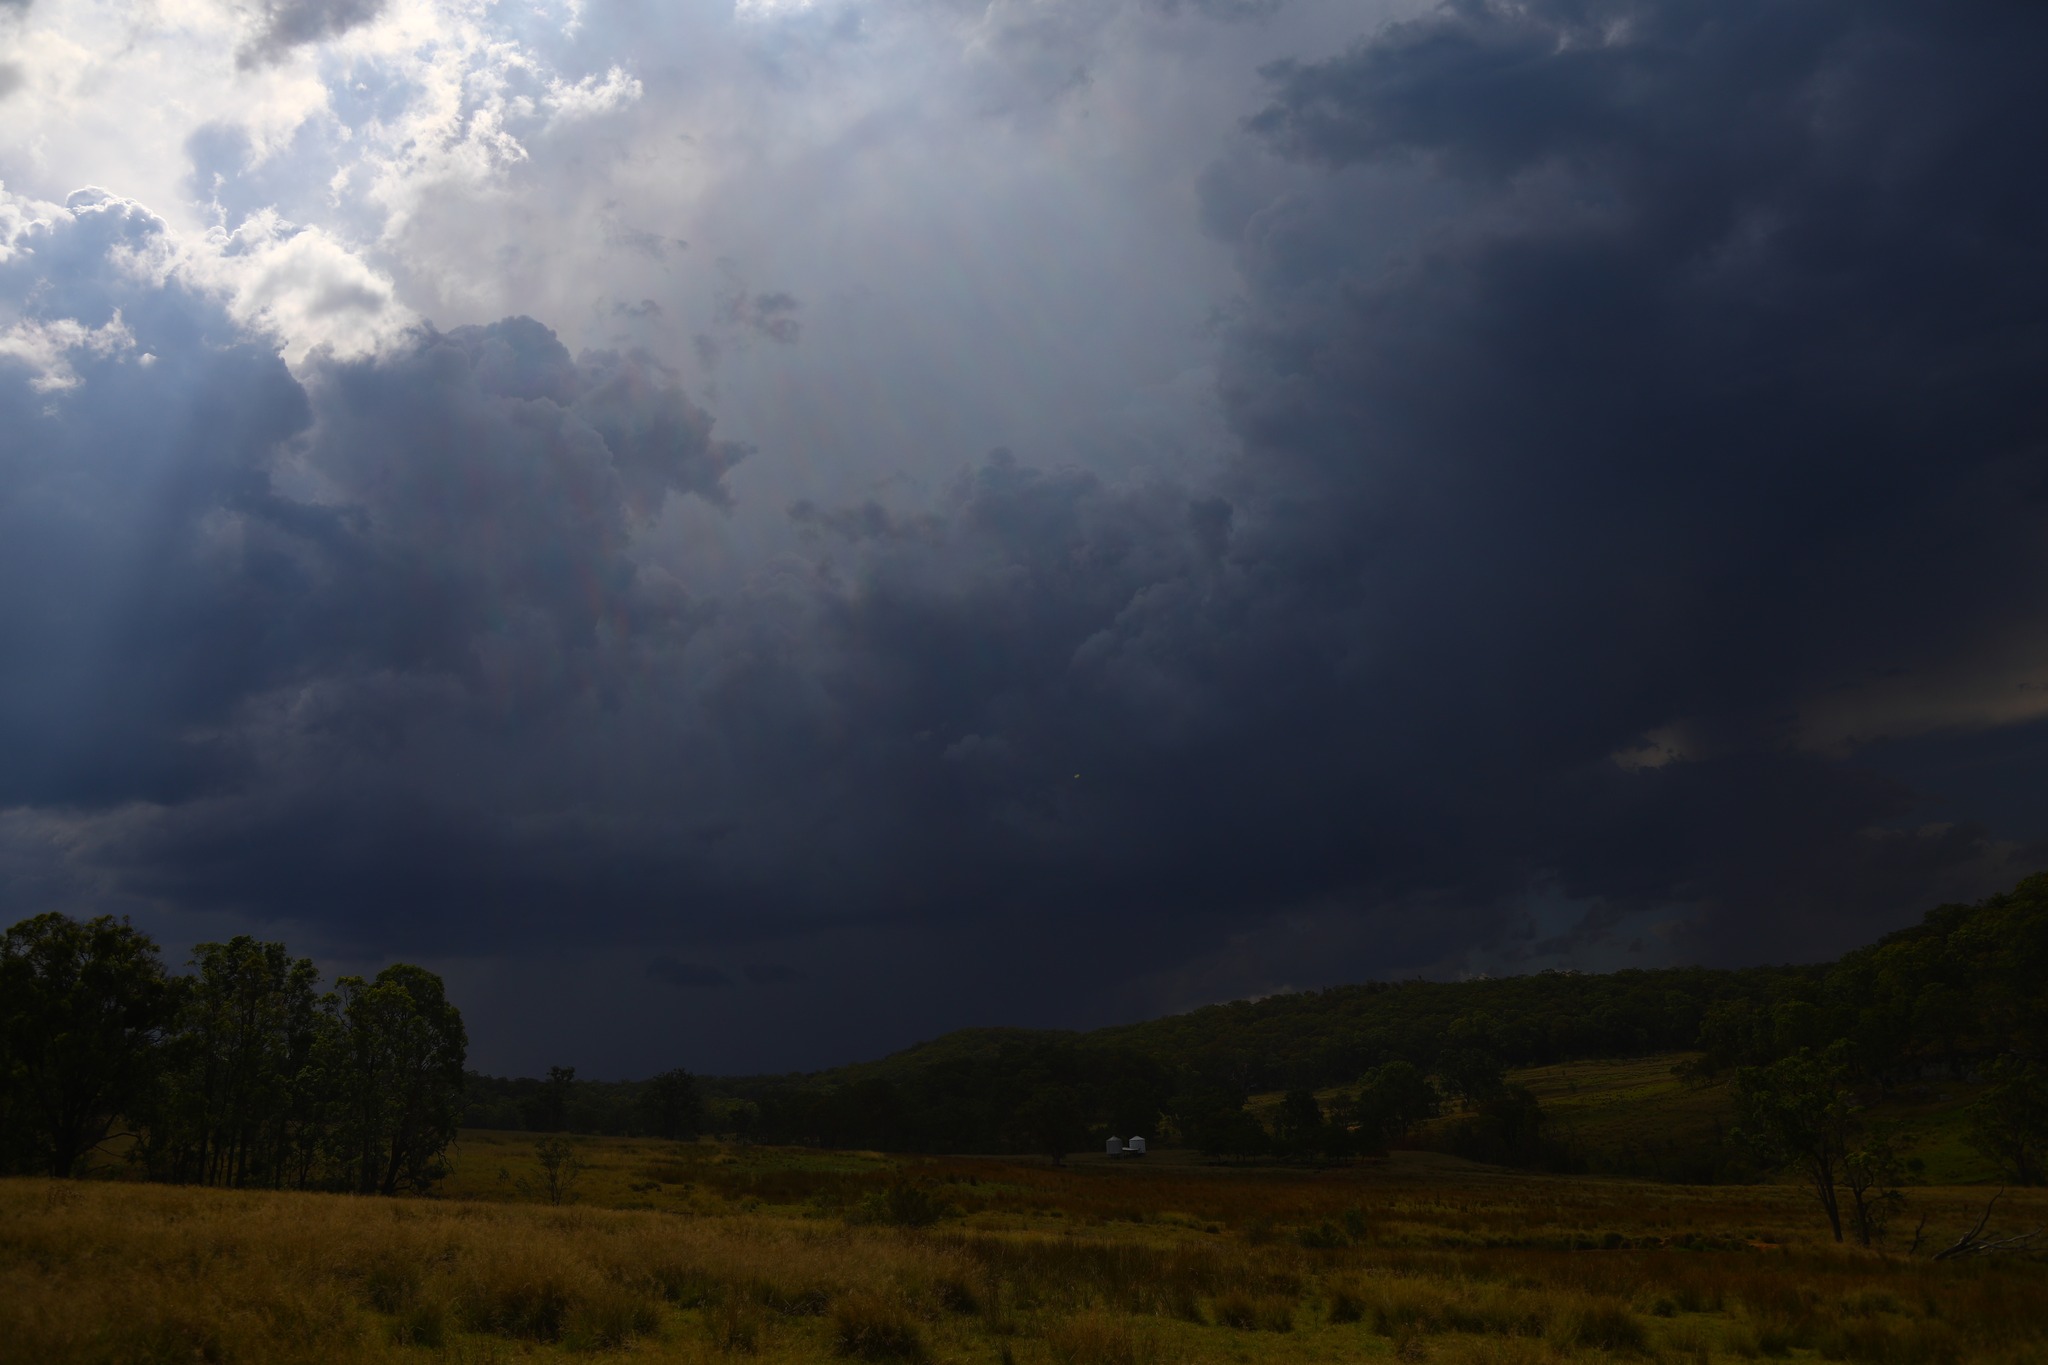 Storm chase today 28th January 2023 with Harley Pearman and got sun-burnt - so hot. First brief storm near Colo Heights weakened and off to near Putty...